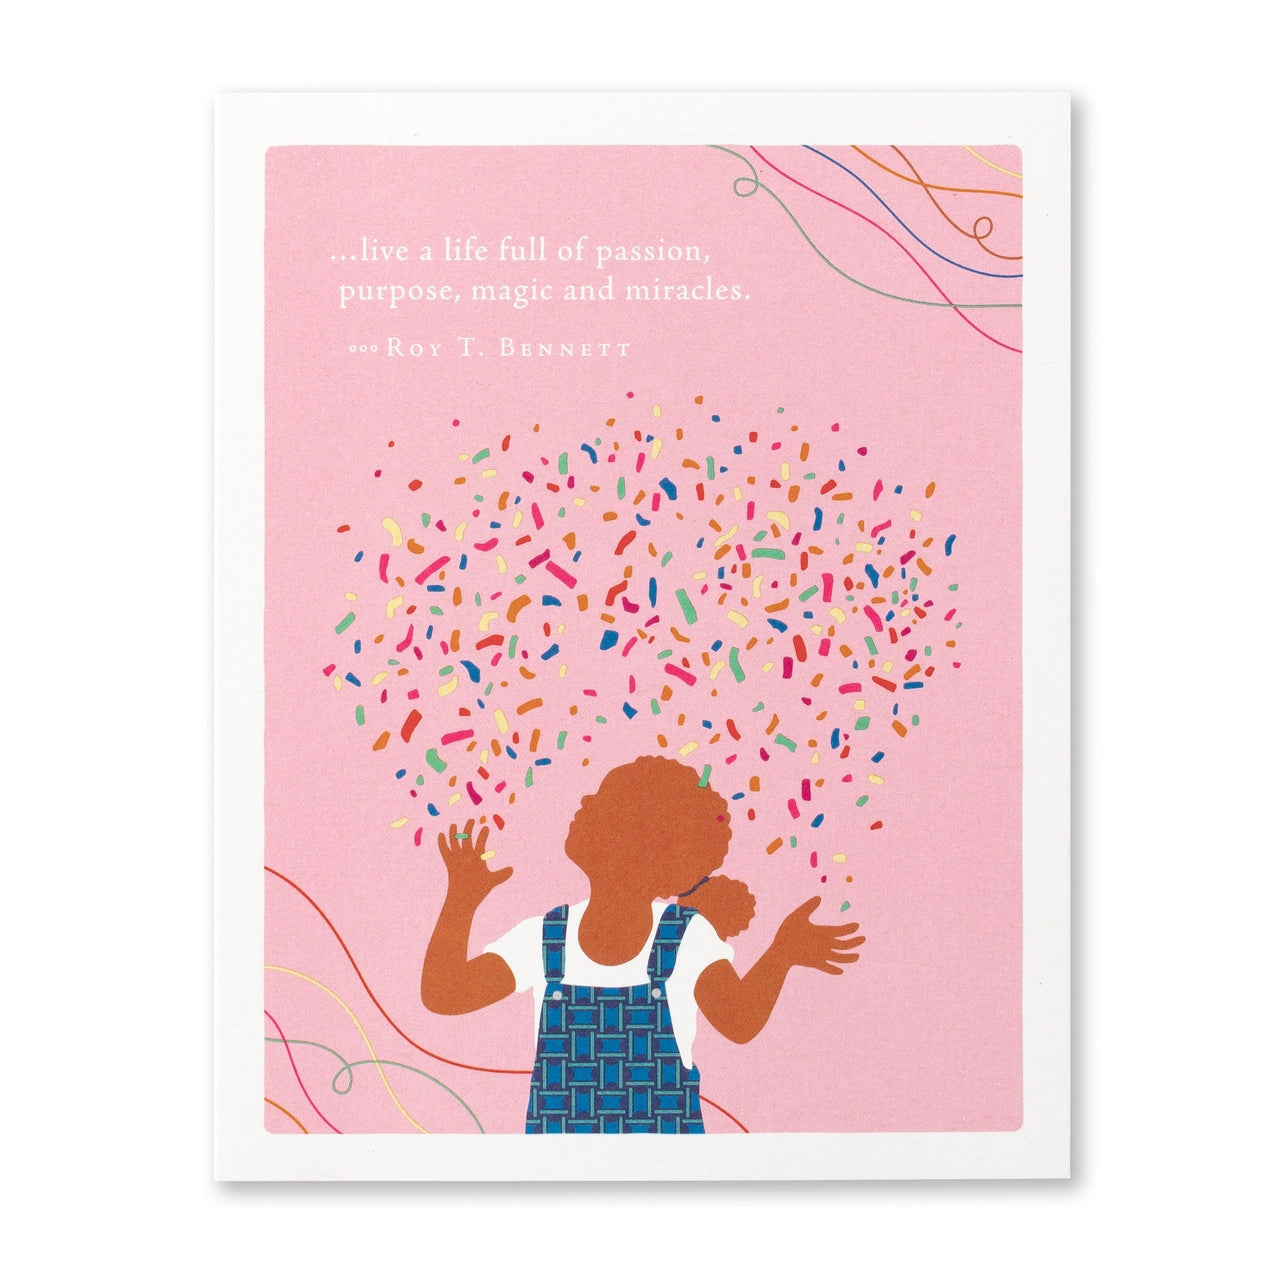 front of card is pink with a little girl throwing confetti in the air and white text listed in the title